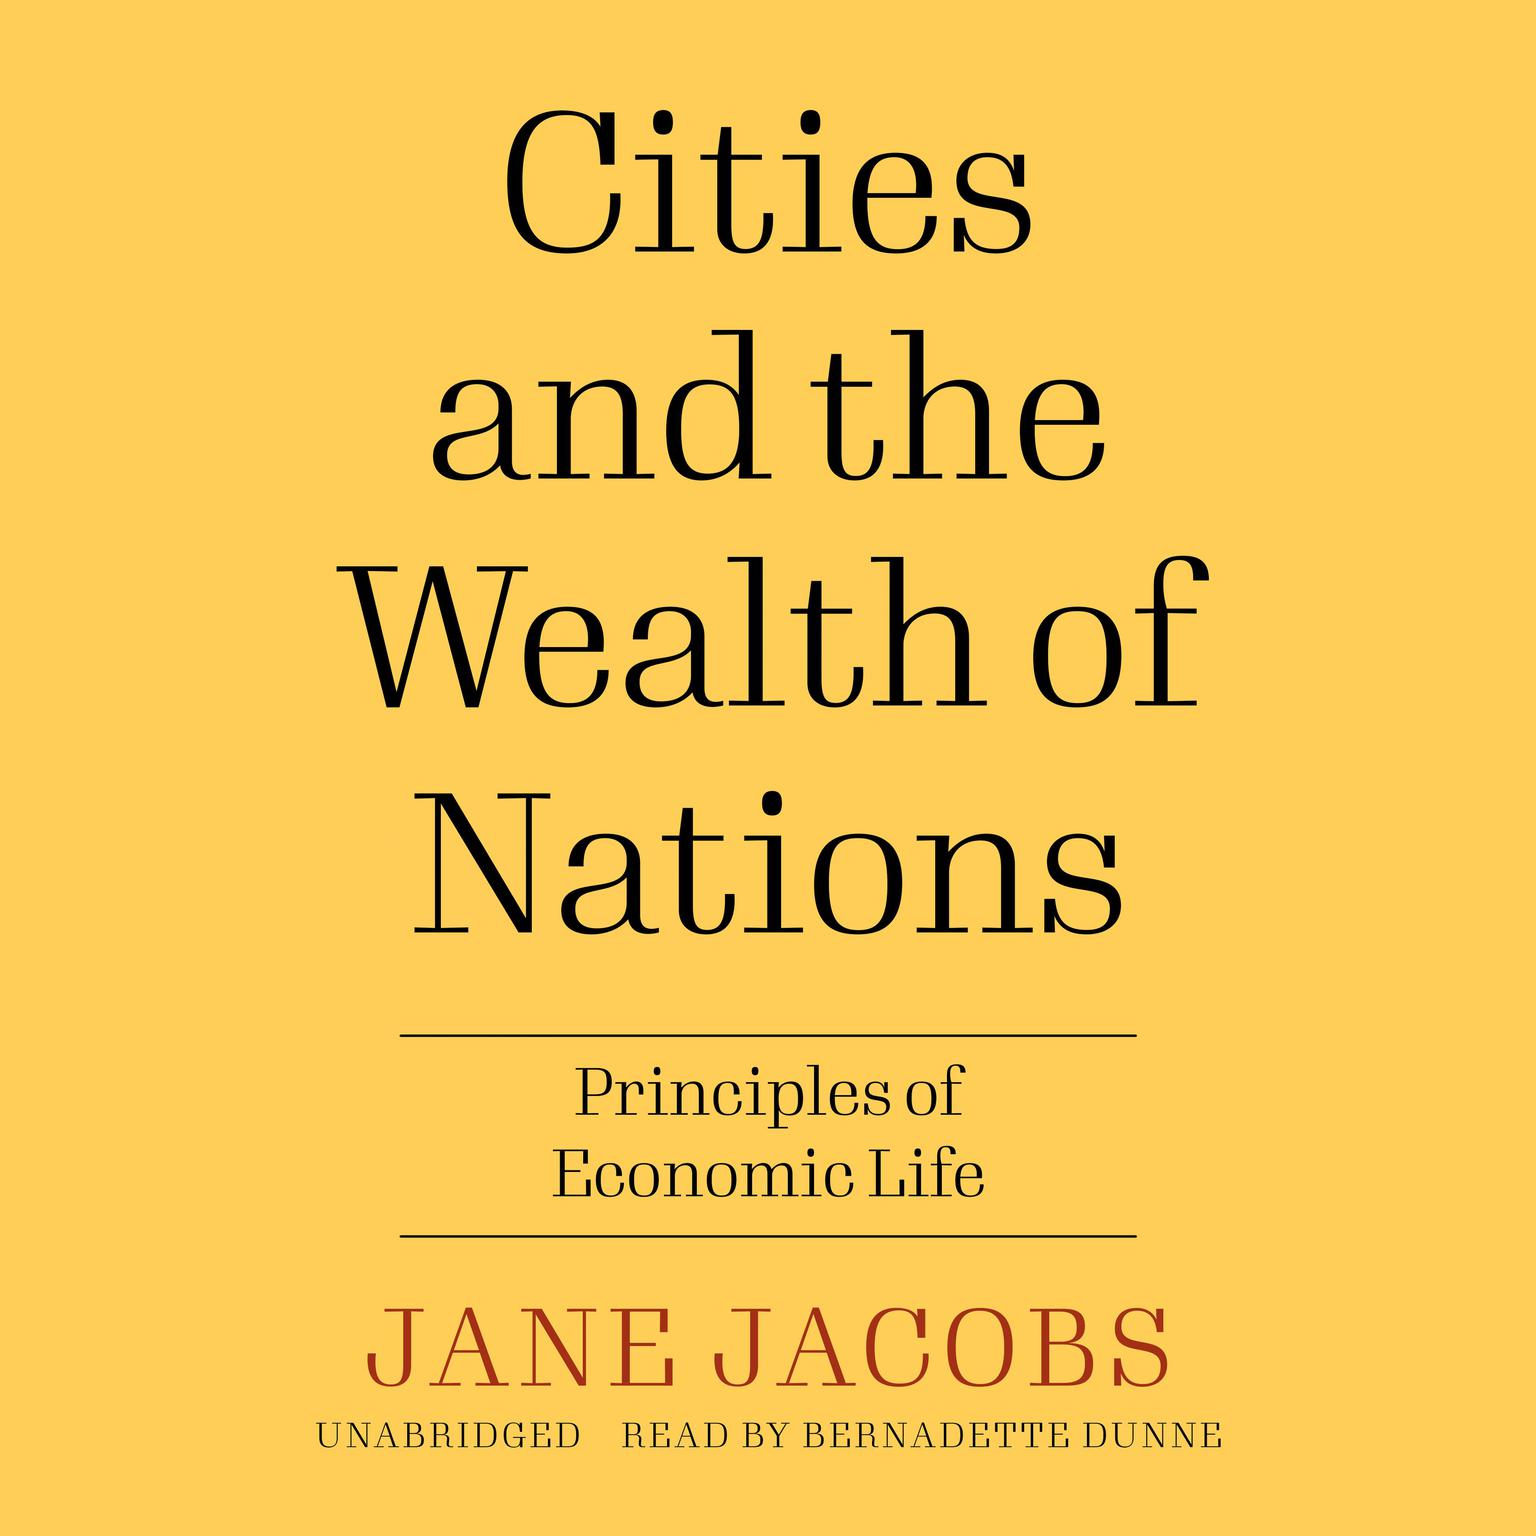 Cities and the Wealth of Nations: Principles of Economic Life Audiobook, by Jane Jacobs